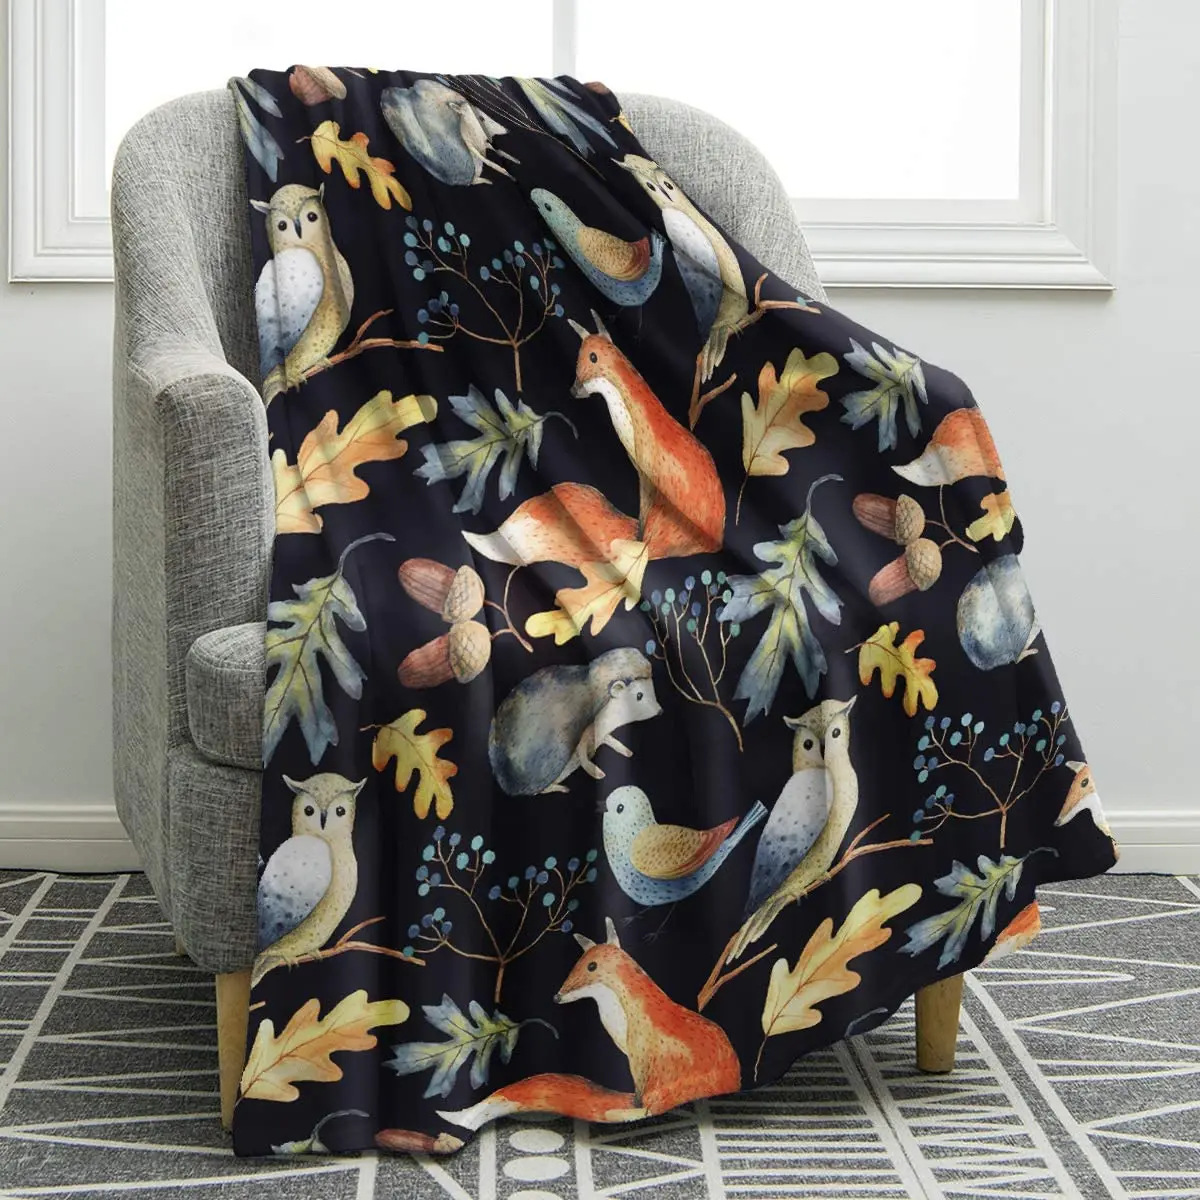 

Owl Fox Blanket Forest Animals Throw Hedgehog Leaves Berries Acorns Pattern Print Blanket Soft Warm Cozy for Sofa Chair Bed